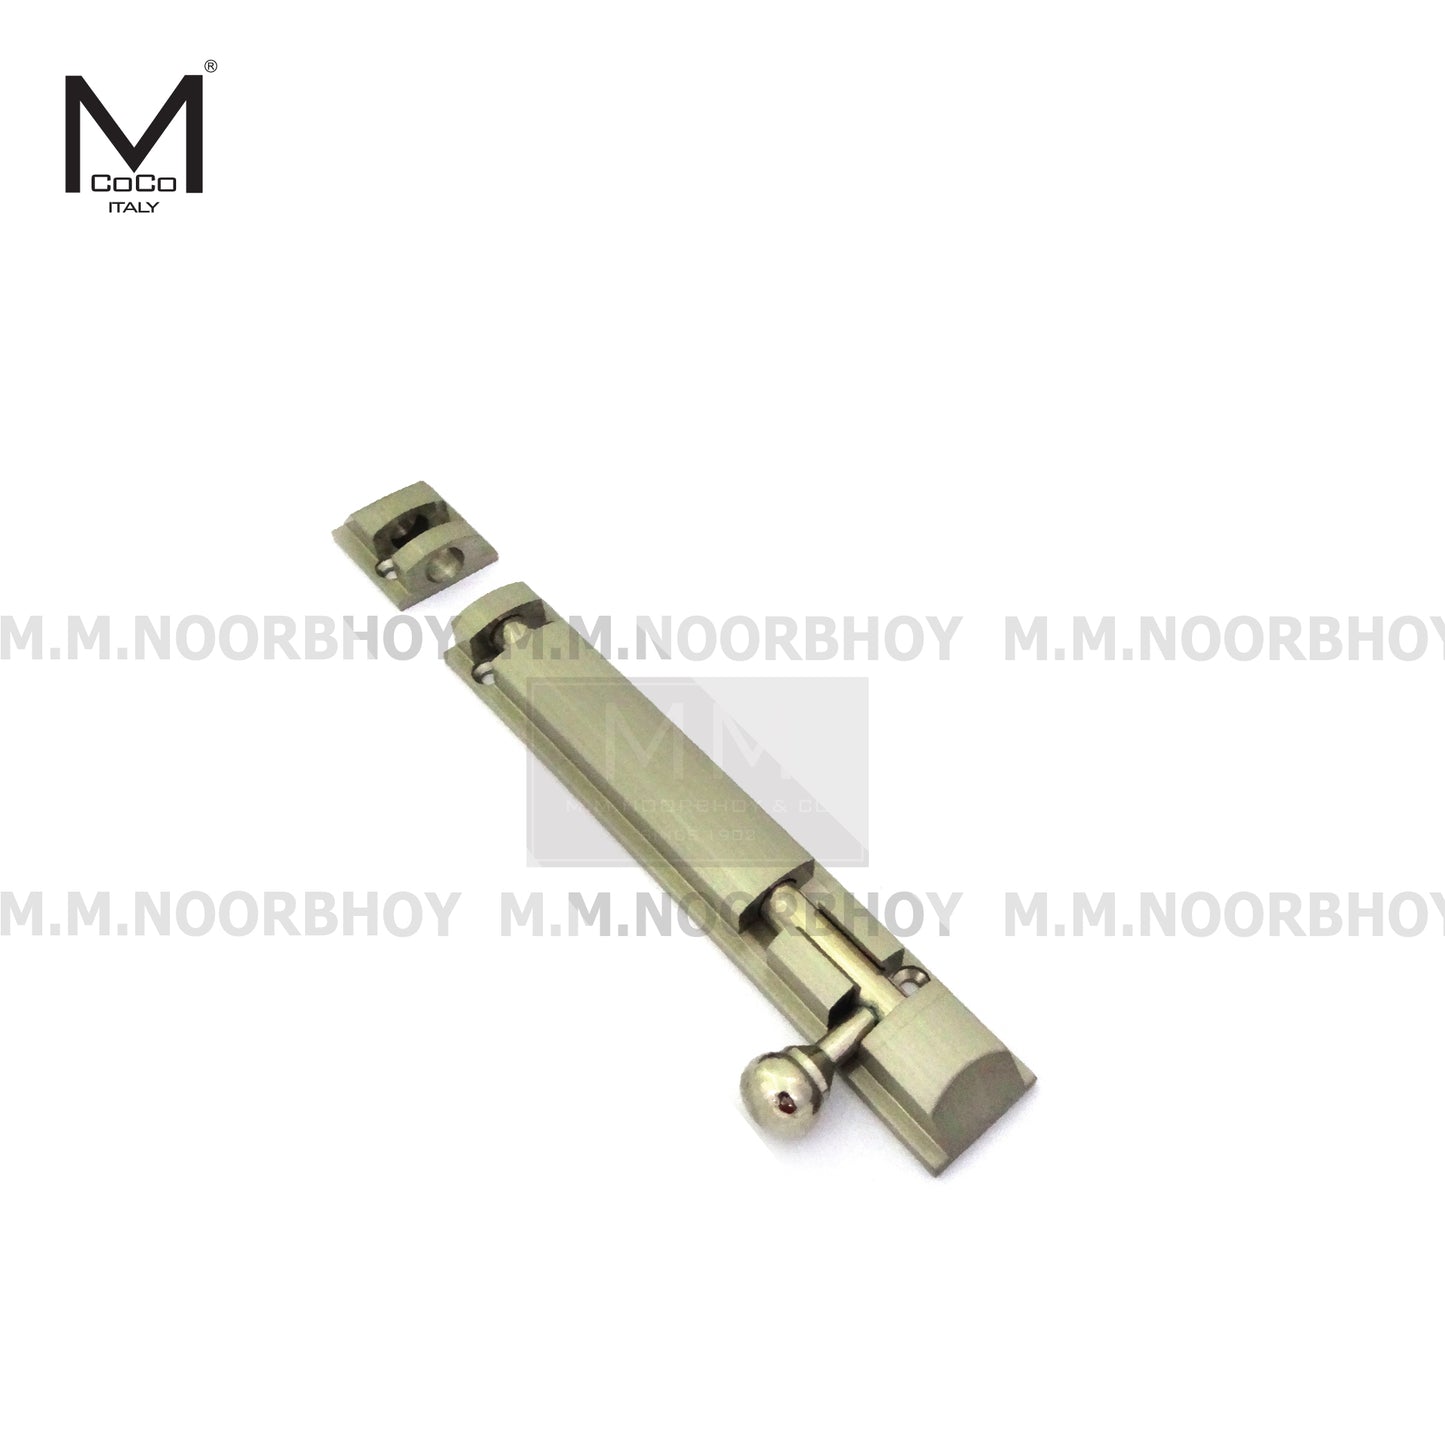 Mcoco NB Xylo Tower Bolt, Sizes 4 to 24 Inches, Stainless Steel & Antique Brass Finish - TBX